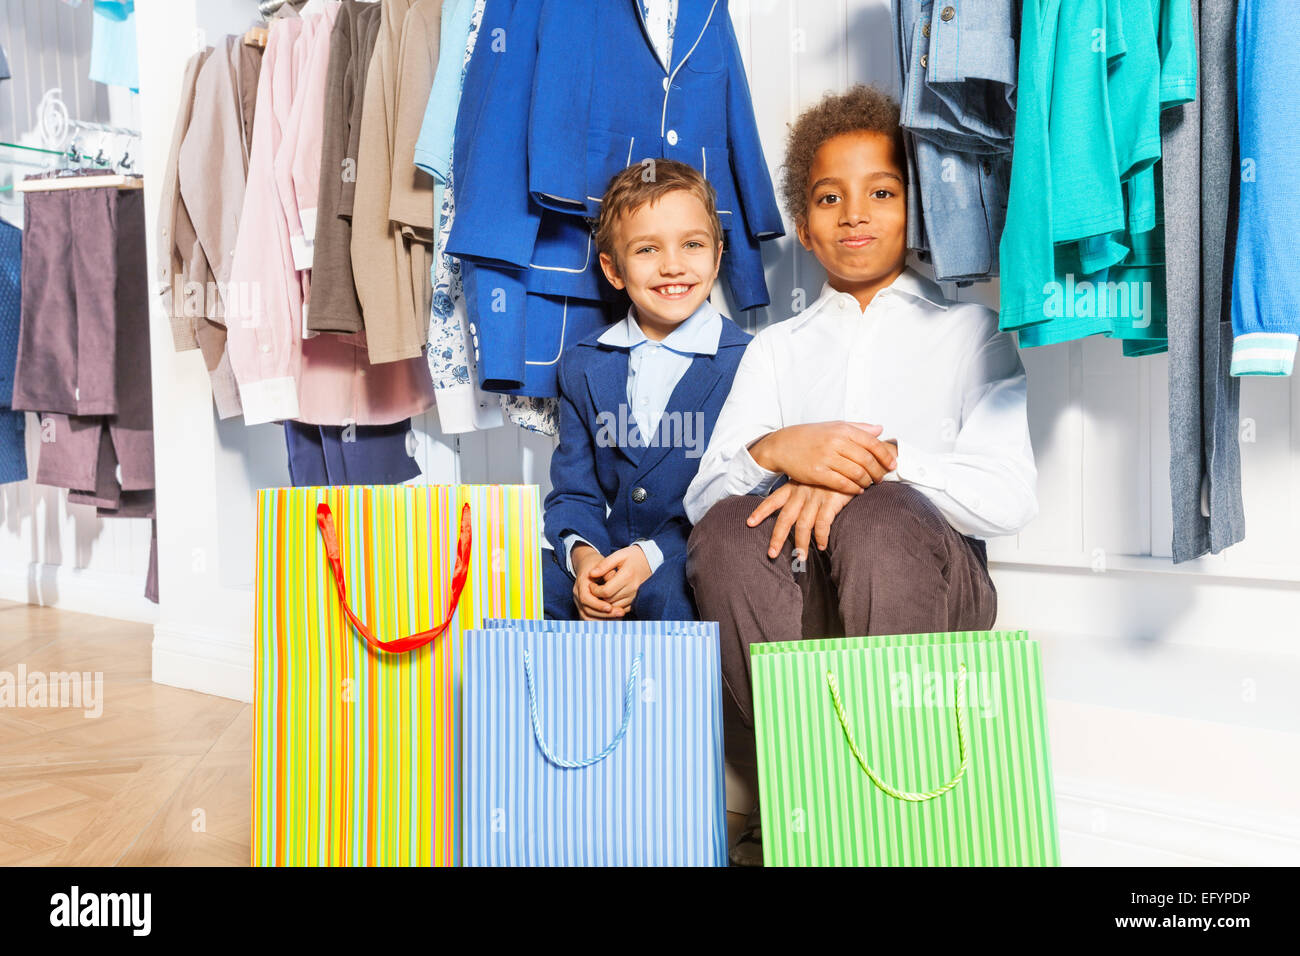 https://c8.alamy.com/comp/EFYPDP/two-boys-sitting-under-hangers-with-clothes-EFYPDP.jpg